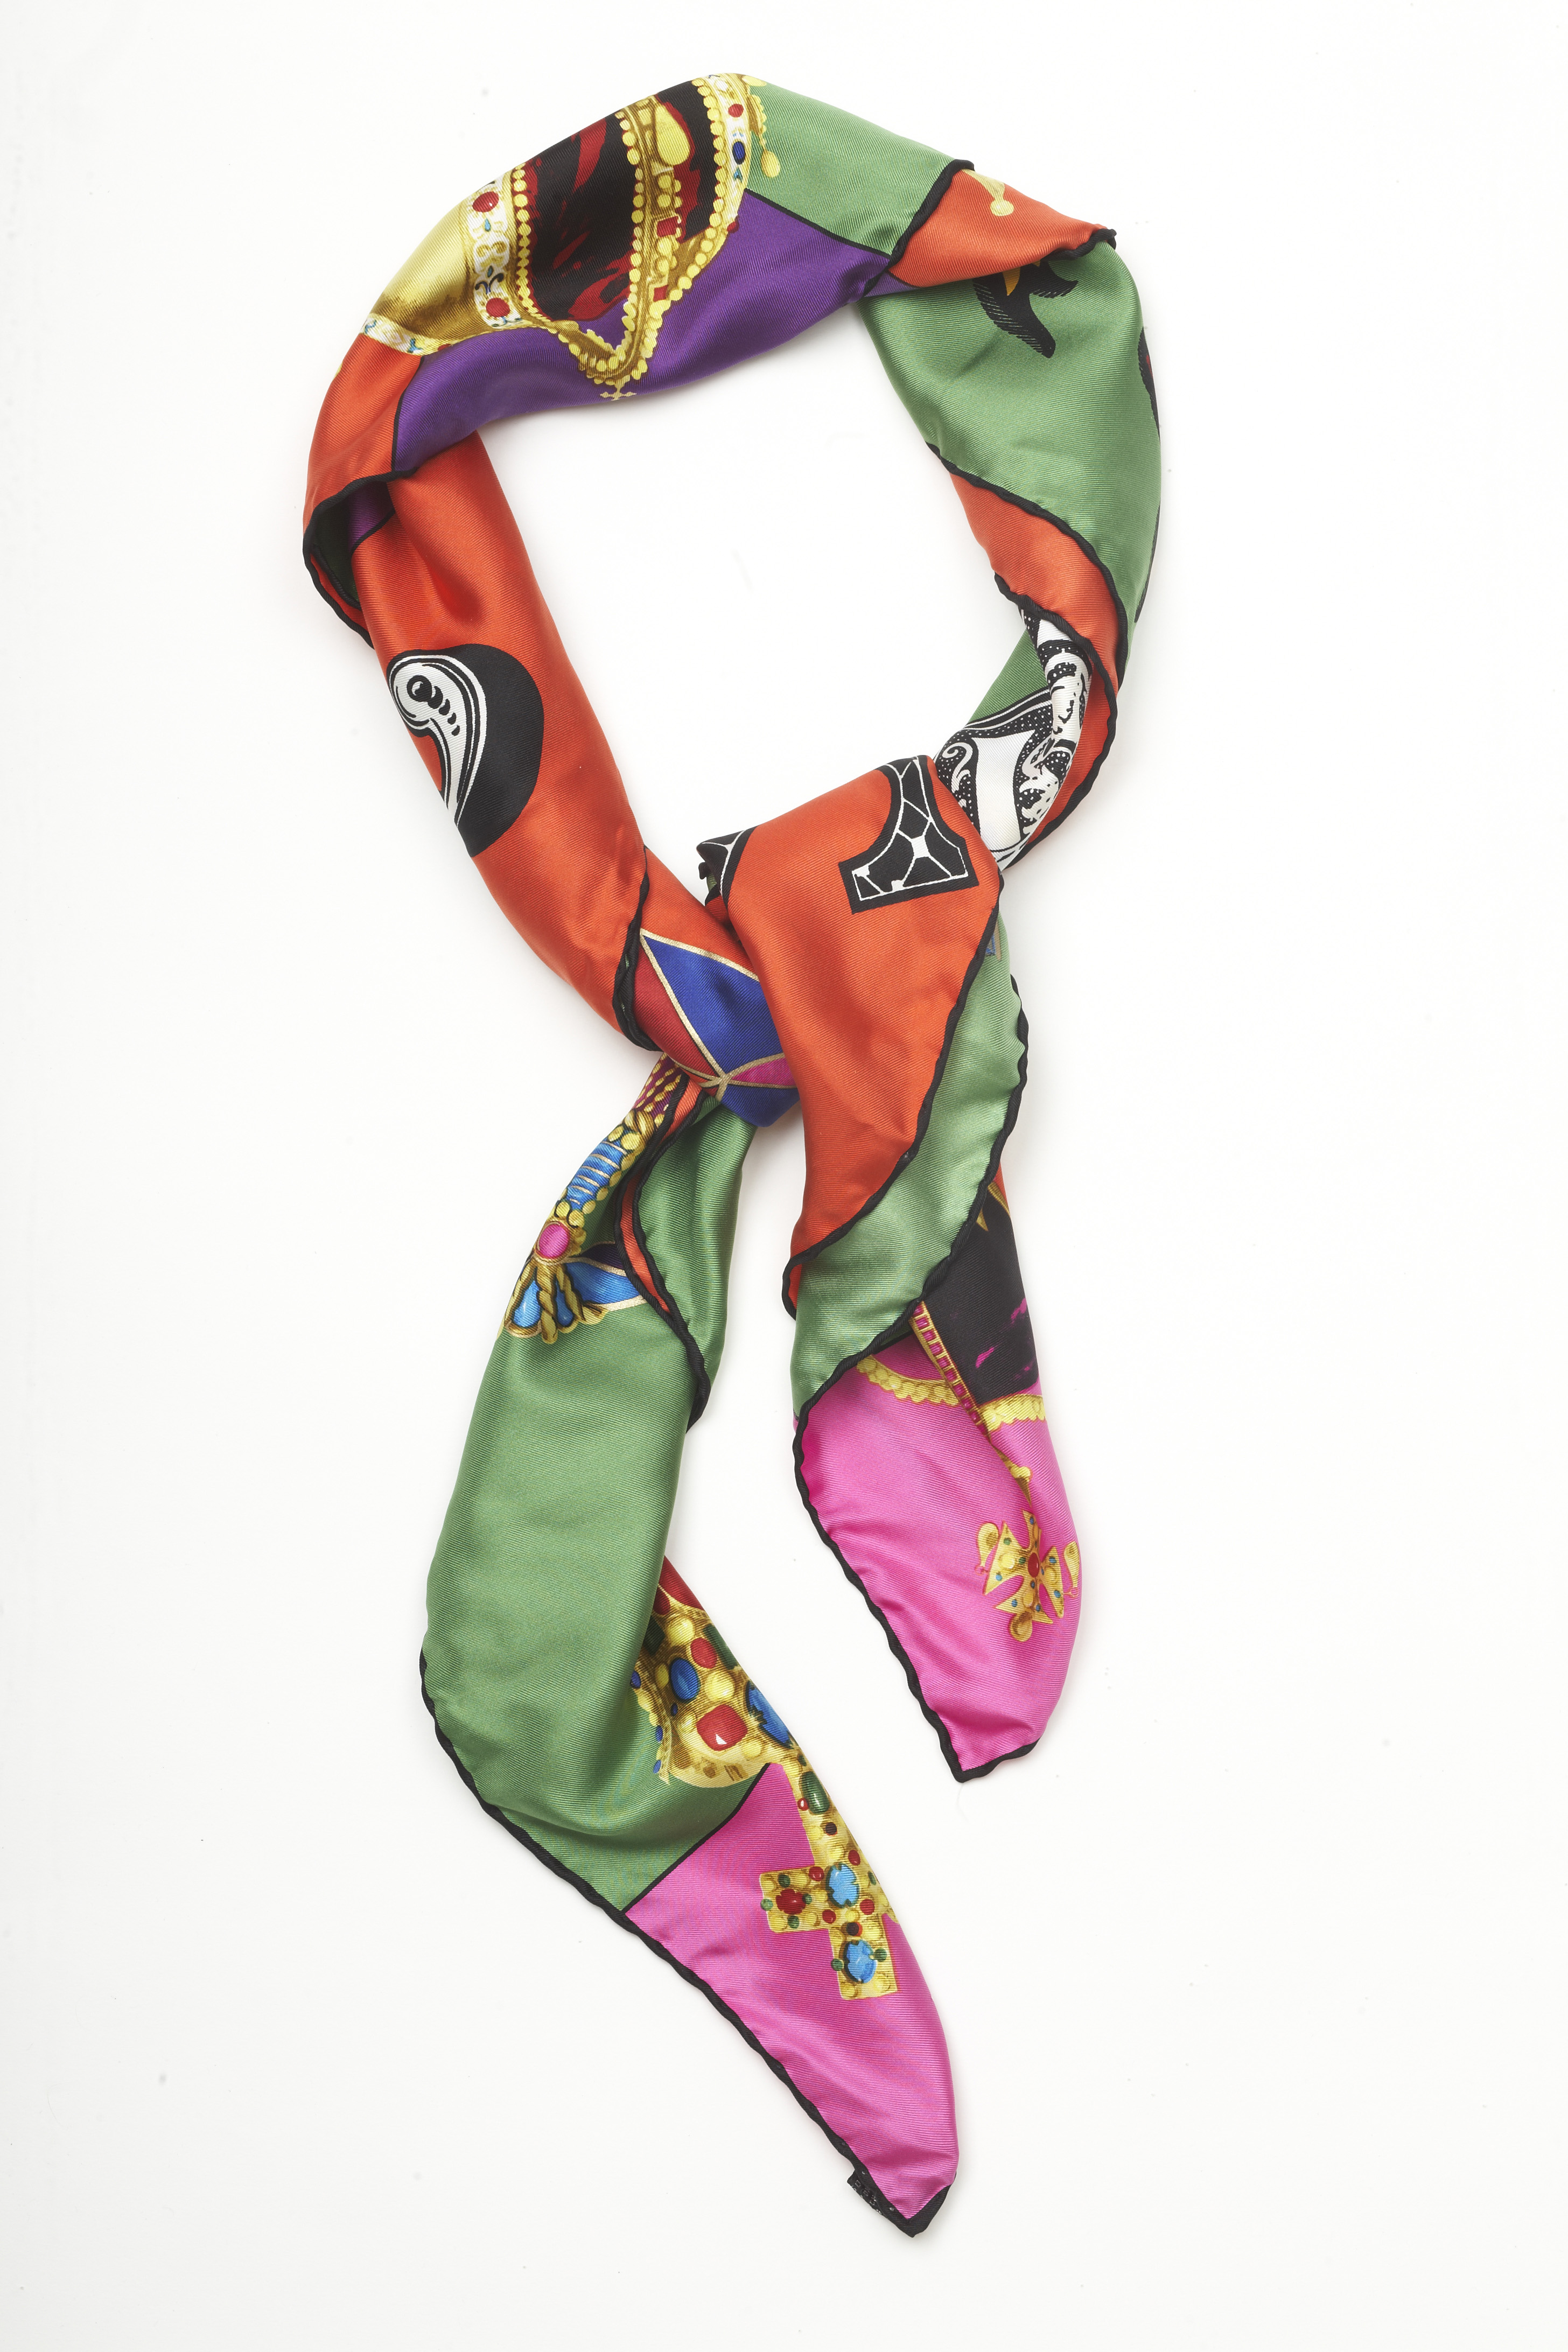 Gianni Versace GOD SAVE THE QUEEN silk scarf | Curate8